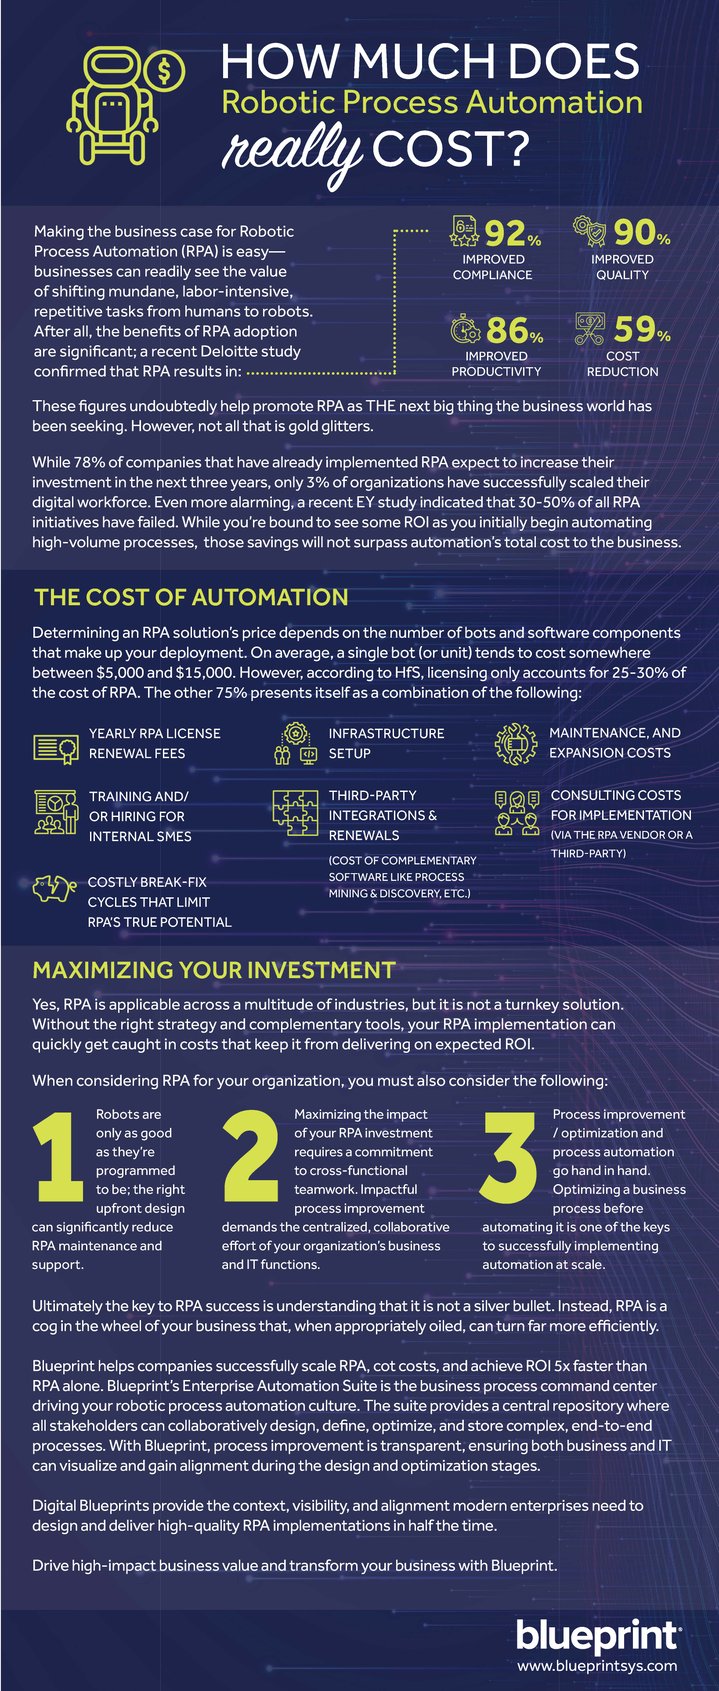 How much does RPA really cost - infographic